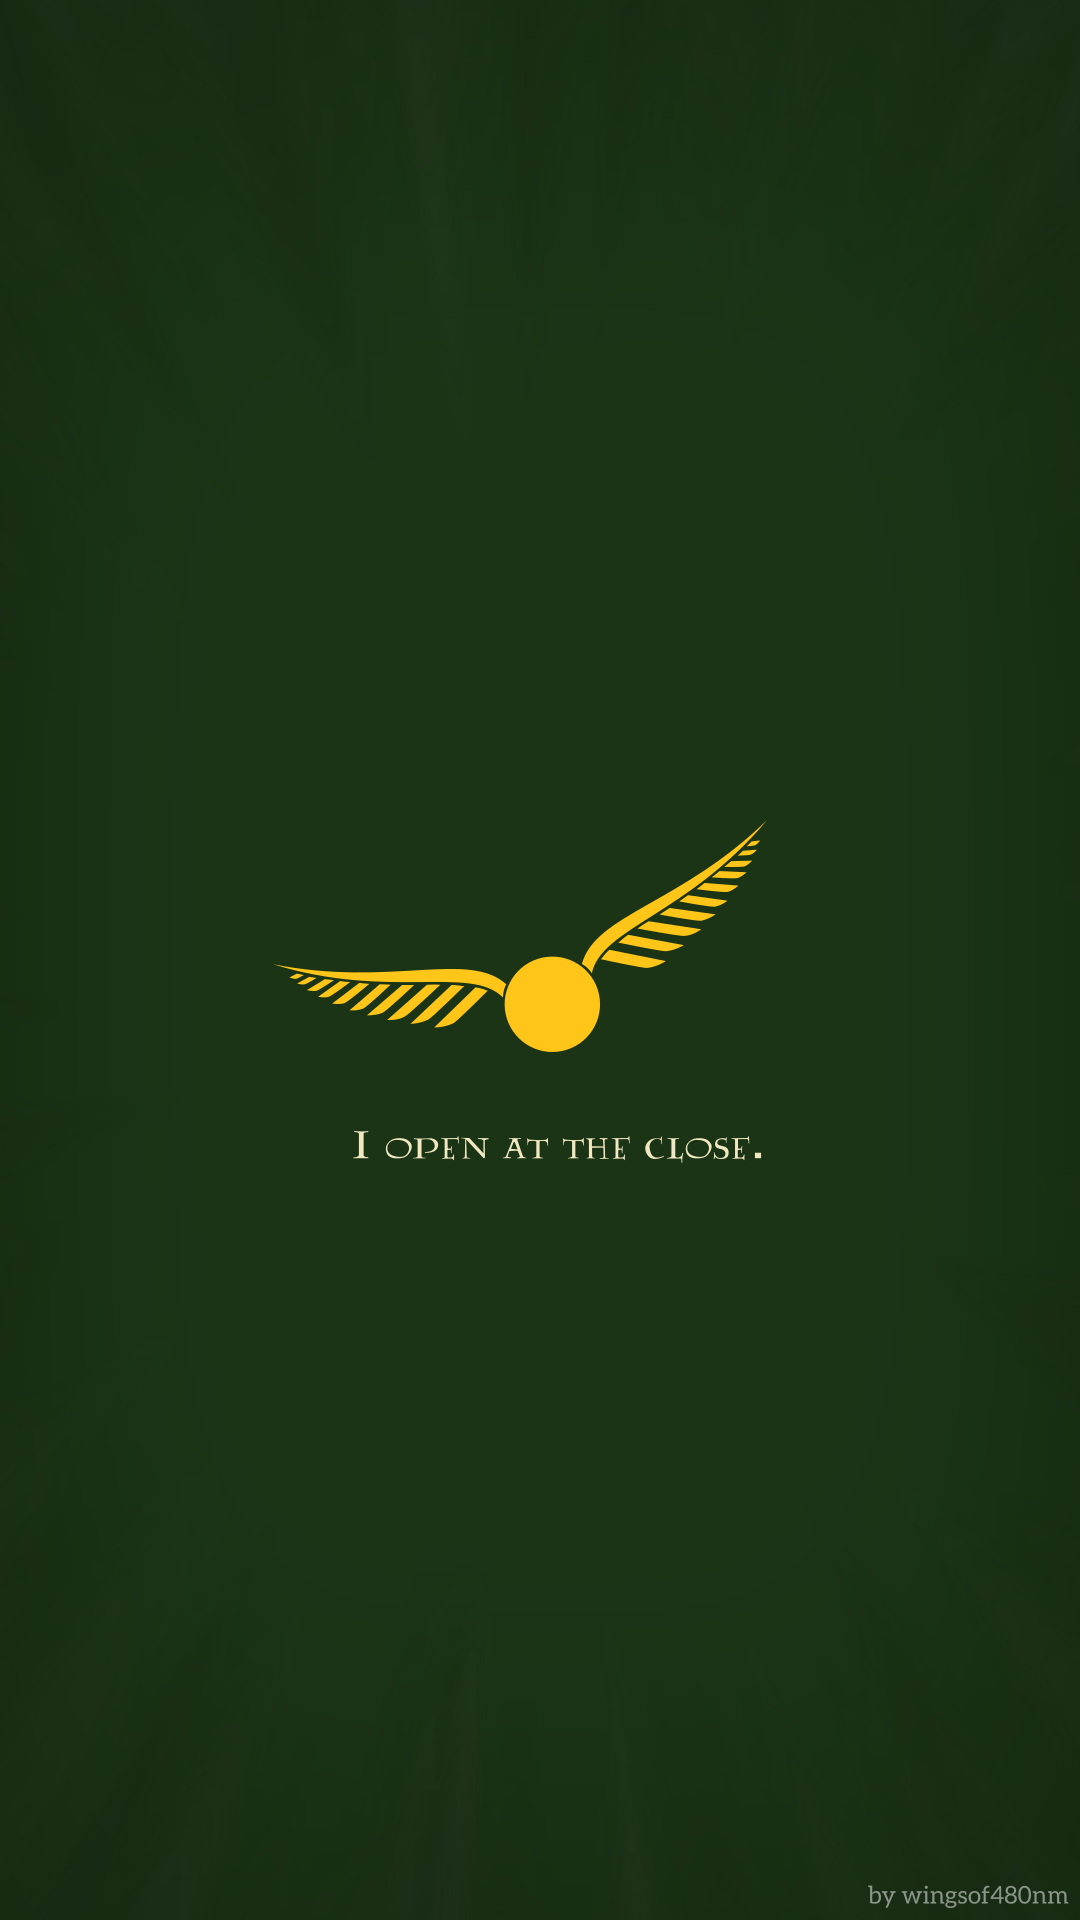 100+] Harry Potter Iphone Wallpapers | Wallpapers.com